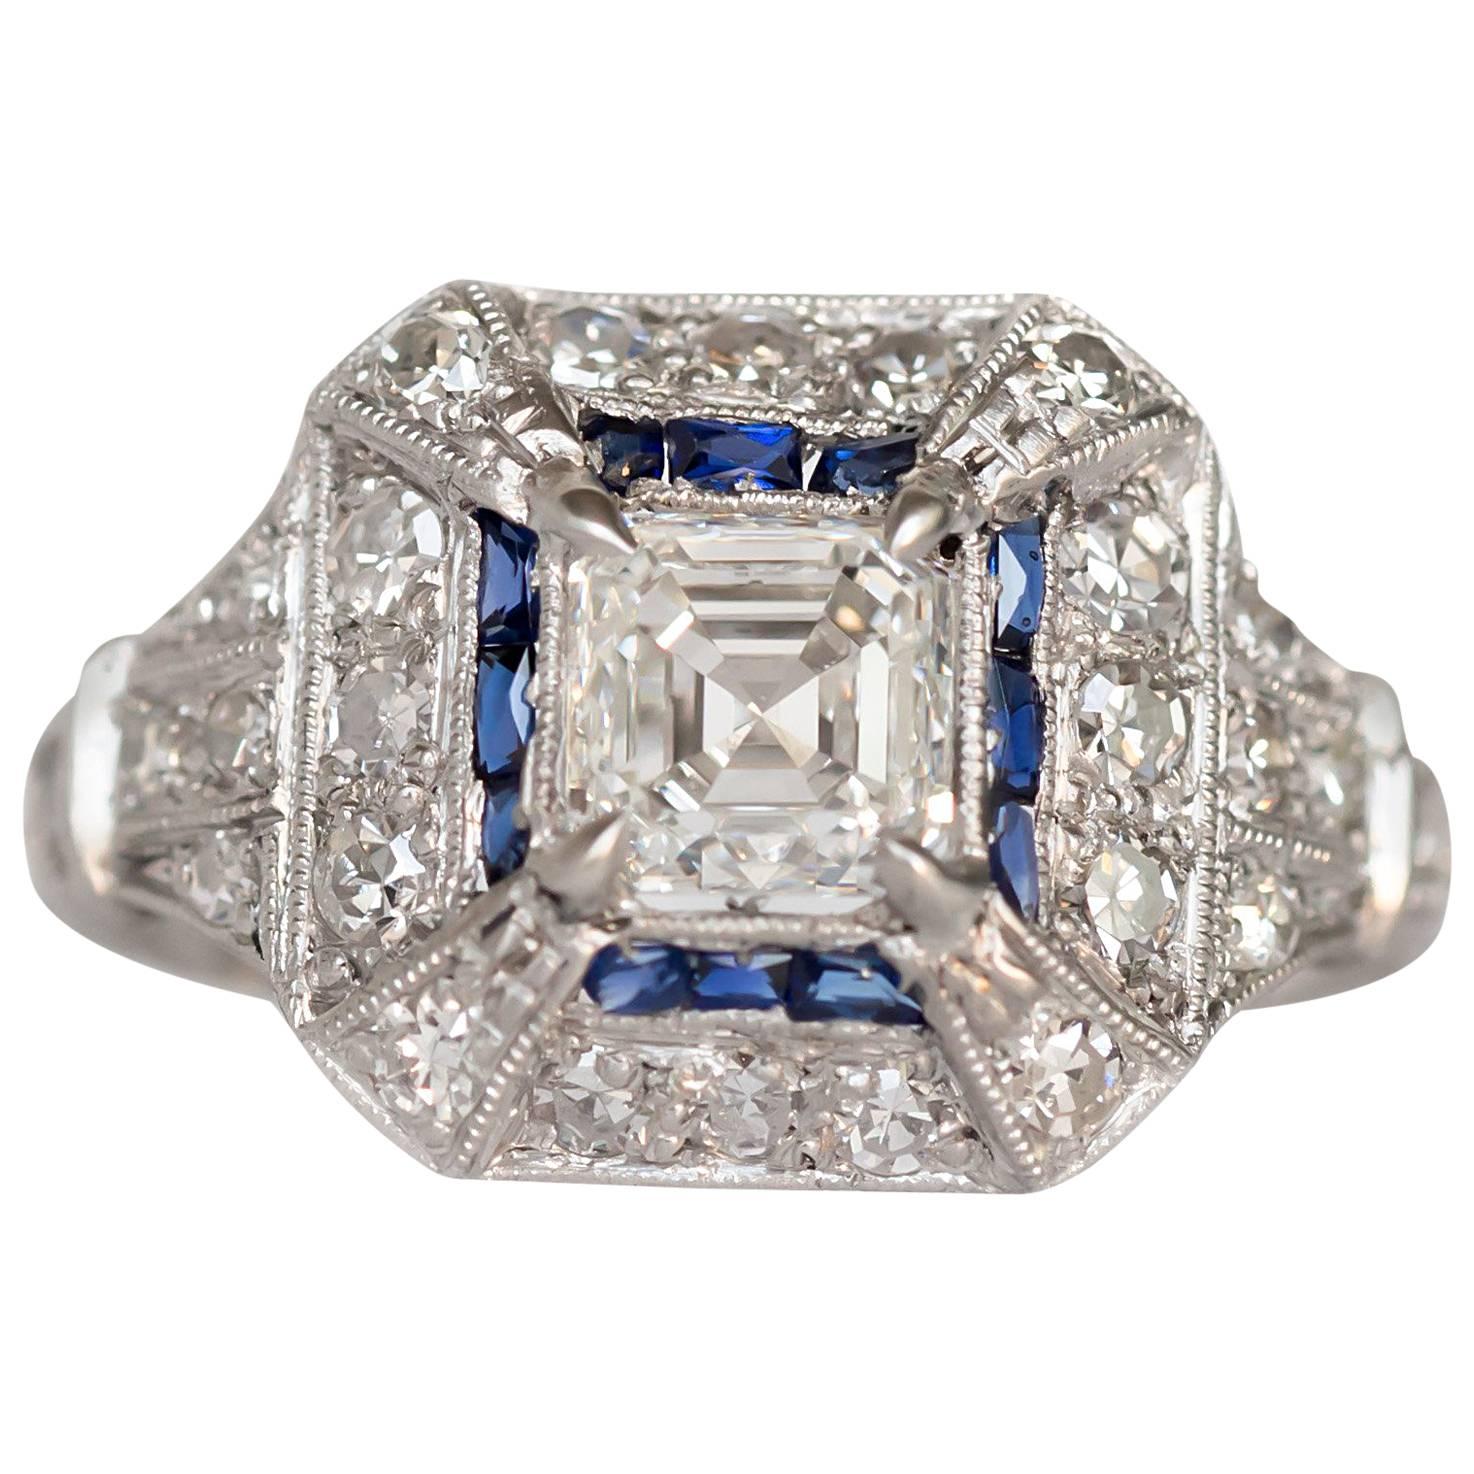 GIA Certified 1.01 Carat Diamond and Sapphire Platinum Engagement Ring